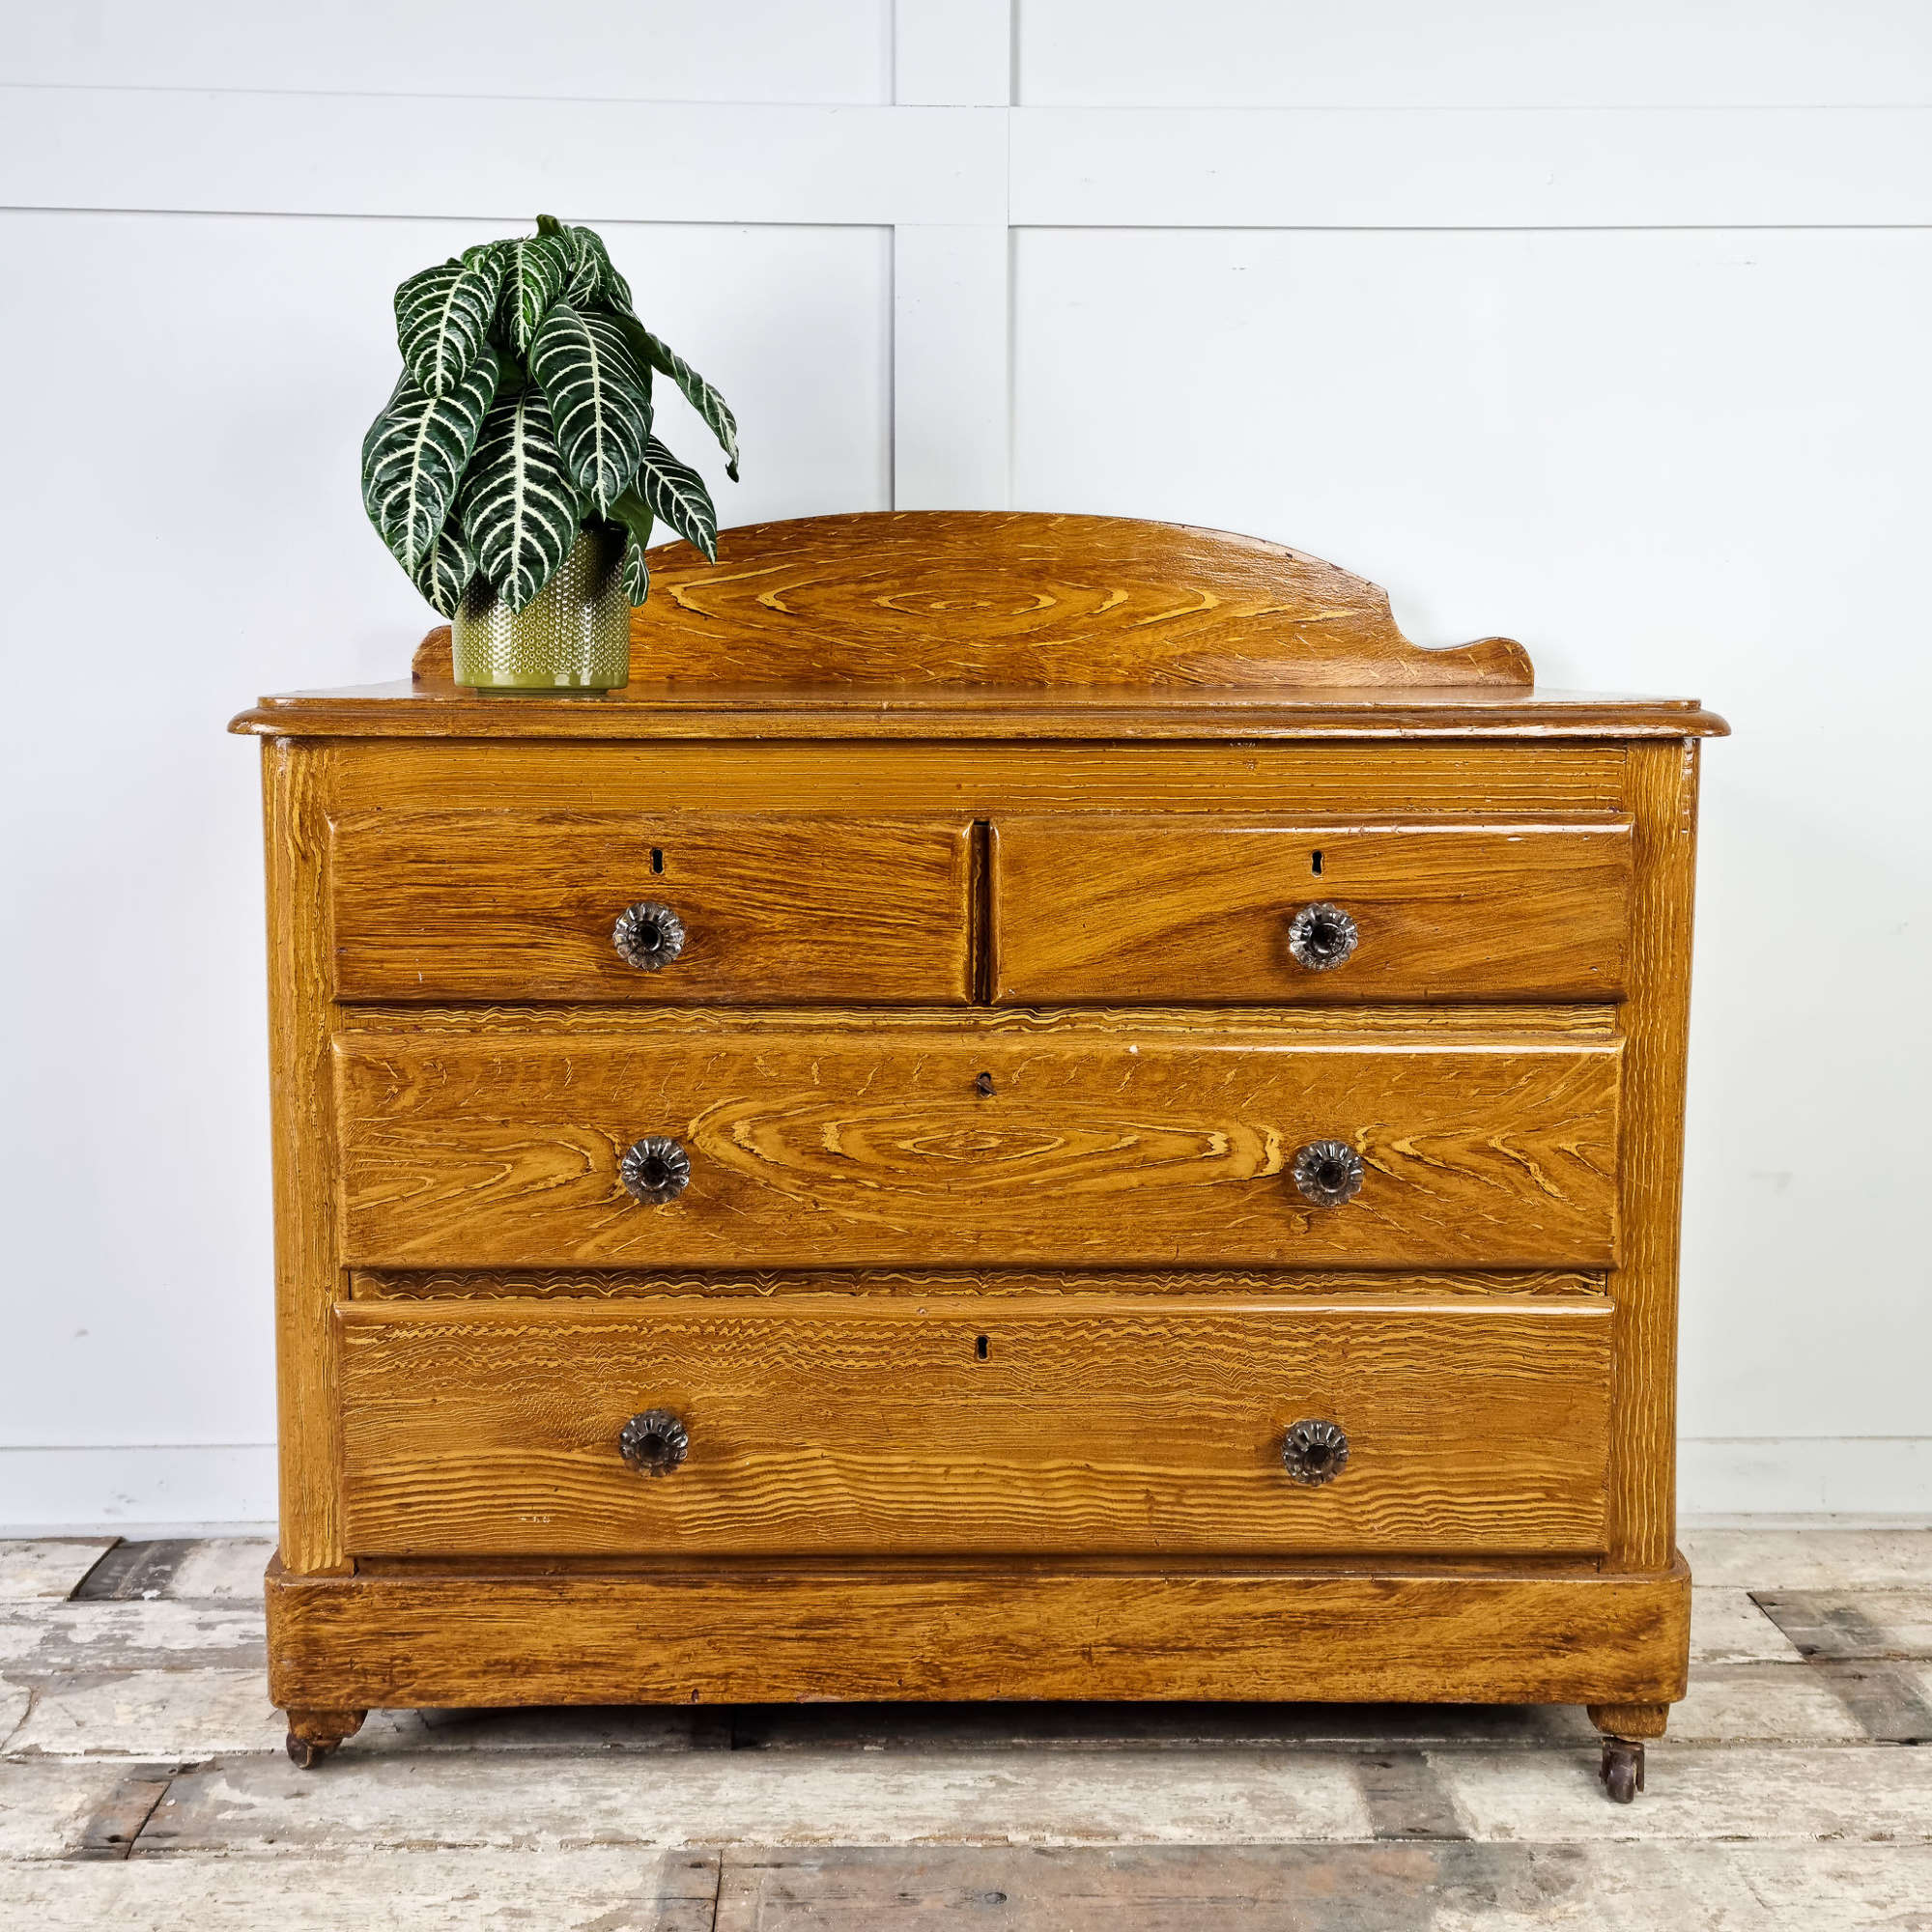 19th Century Antique Chest Of Drawers, Victorian Chest Of Drawers, Bedroom Drawers